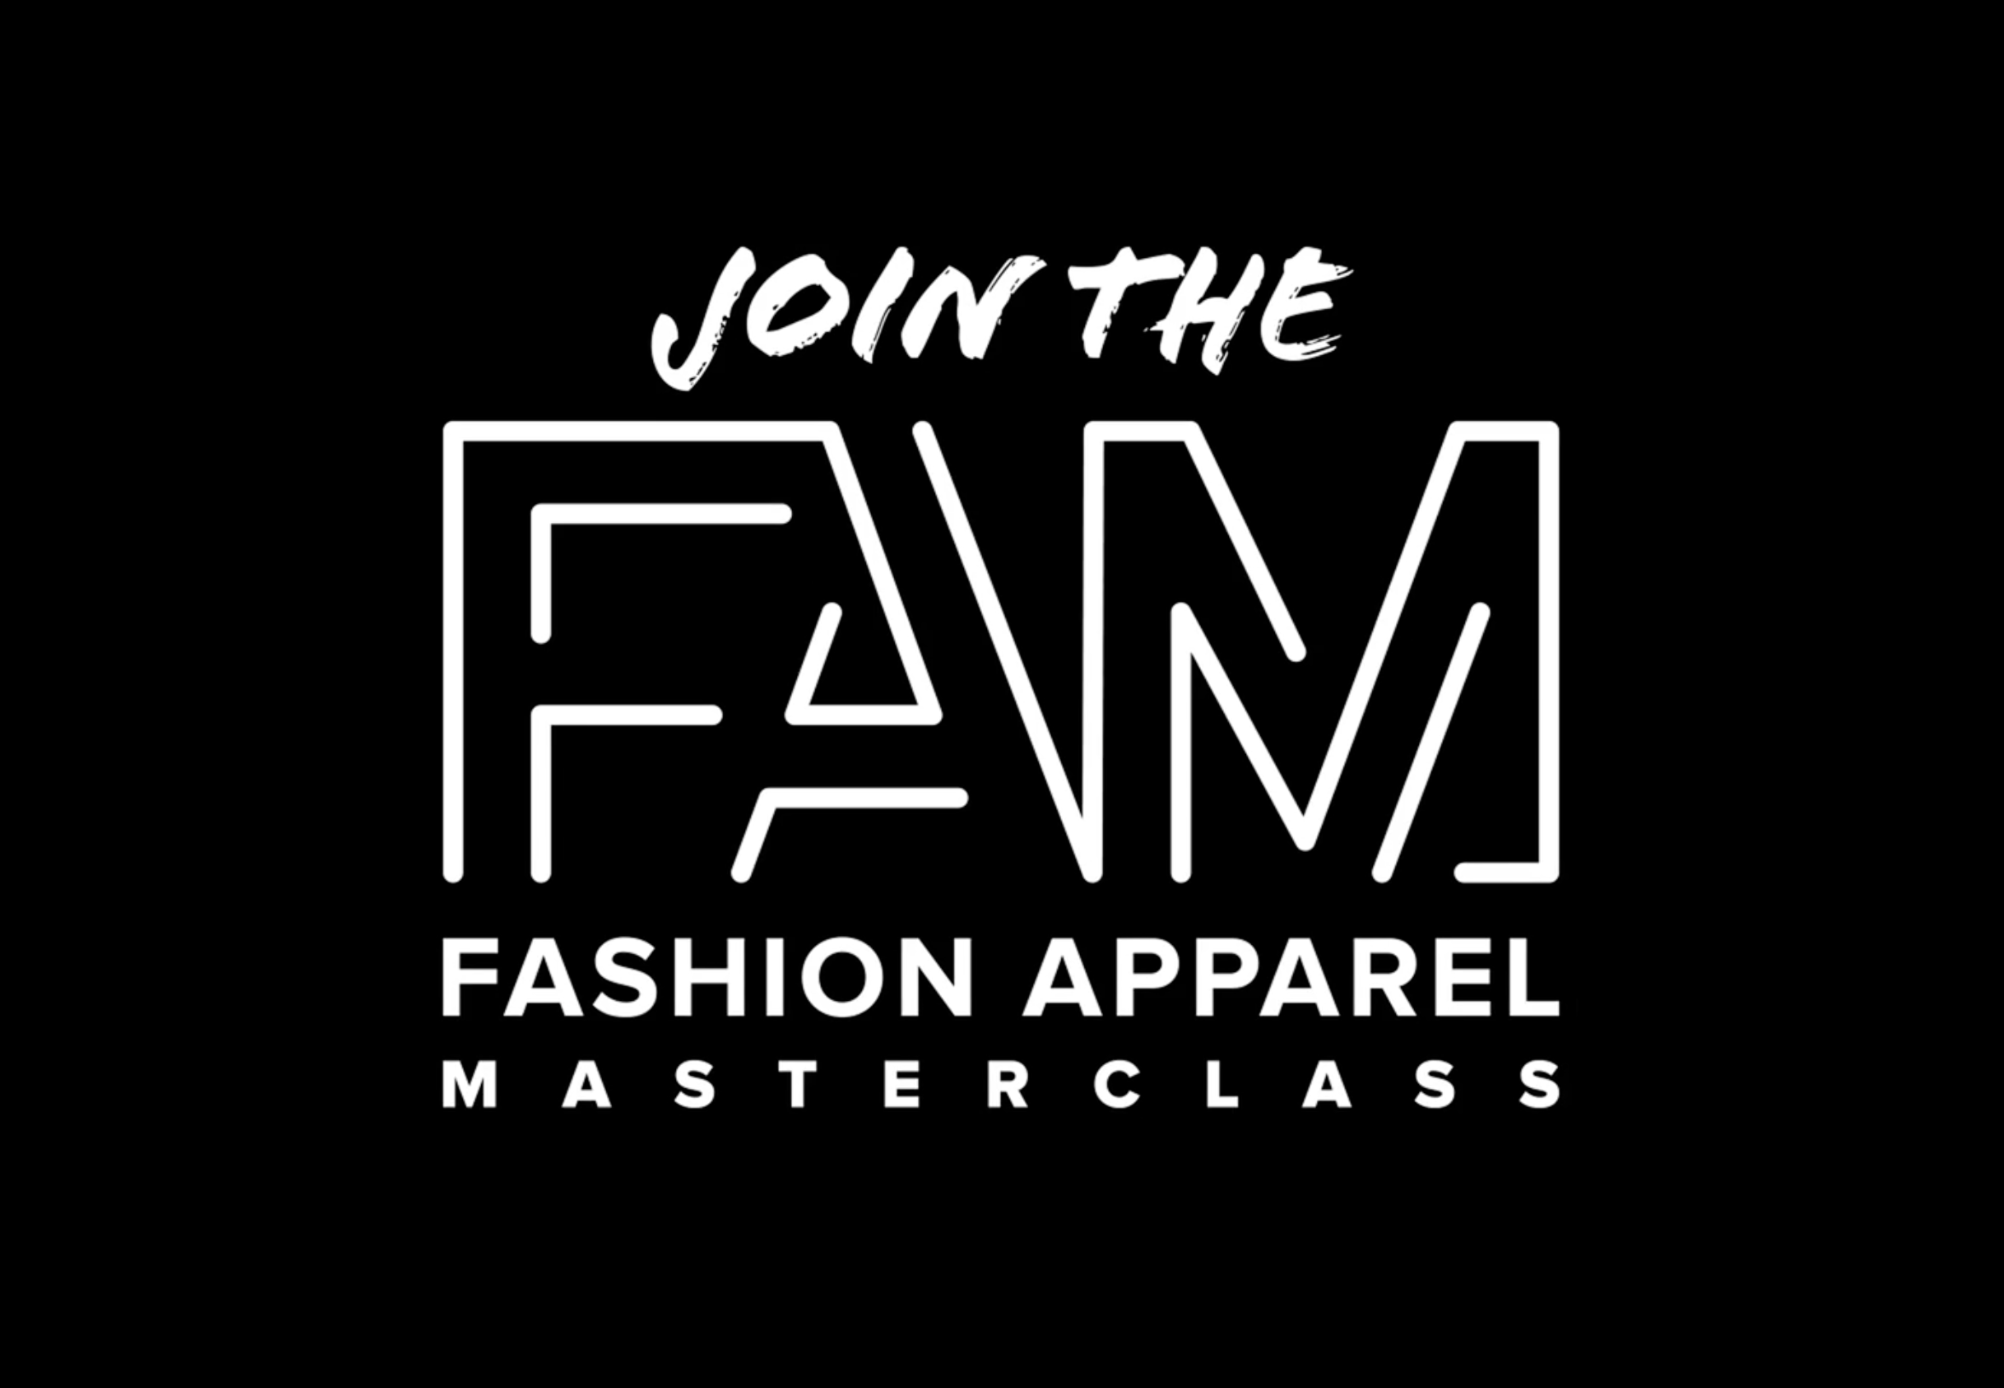 Fashion Apparel Masterclass: Best for Business